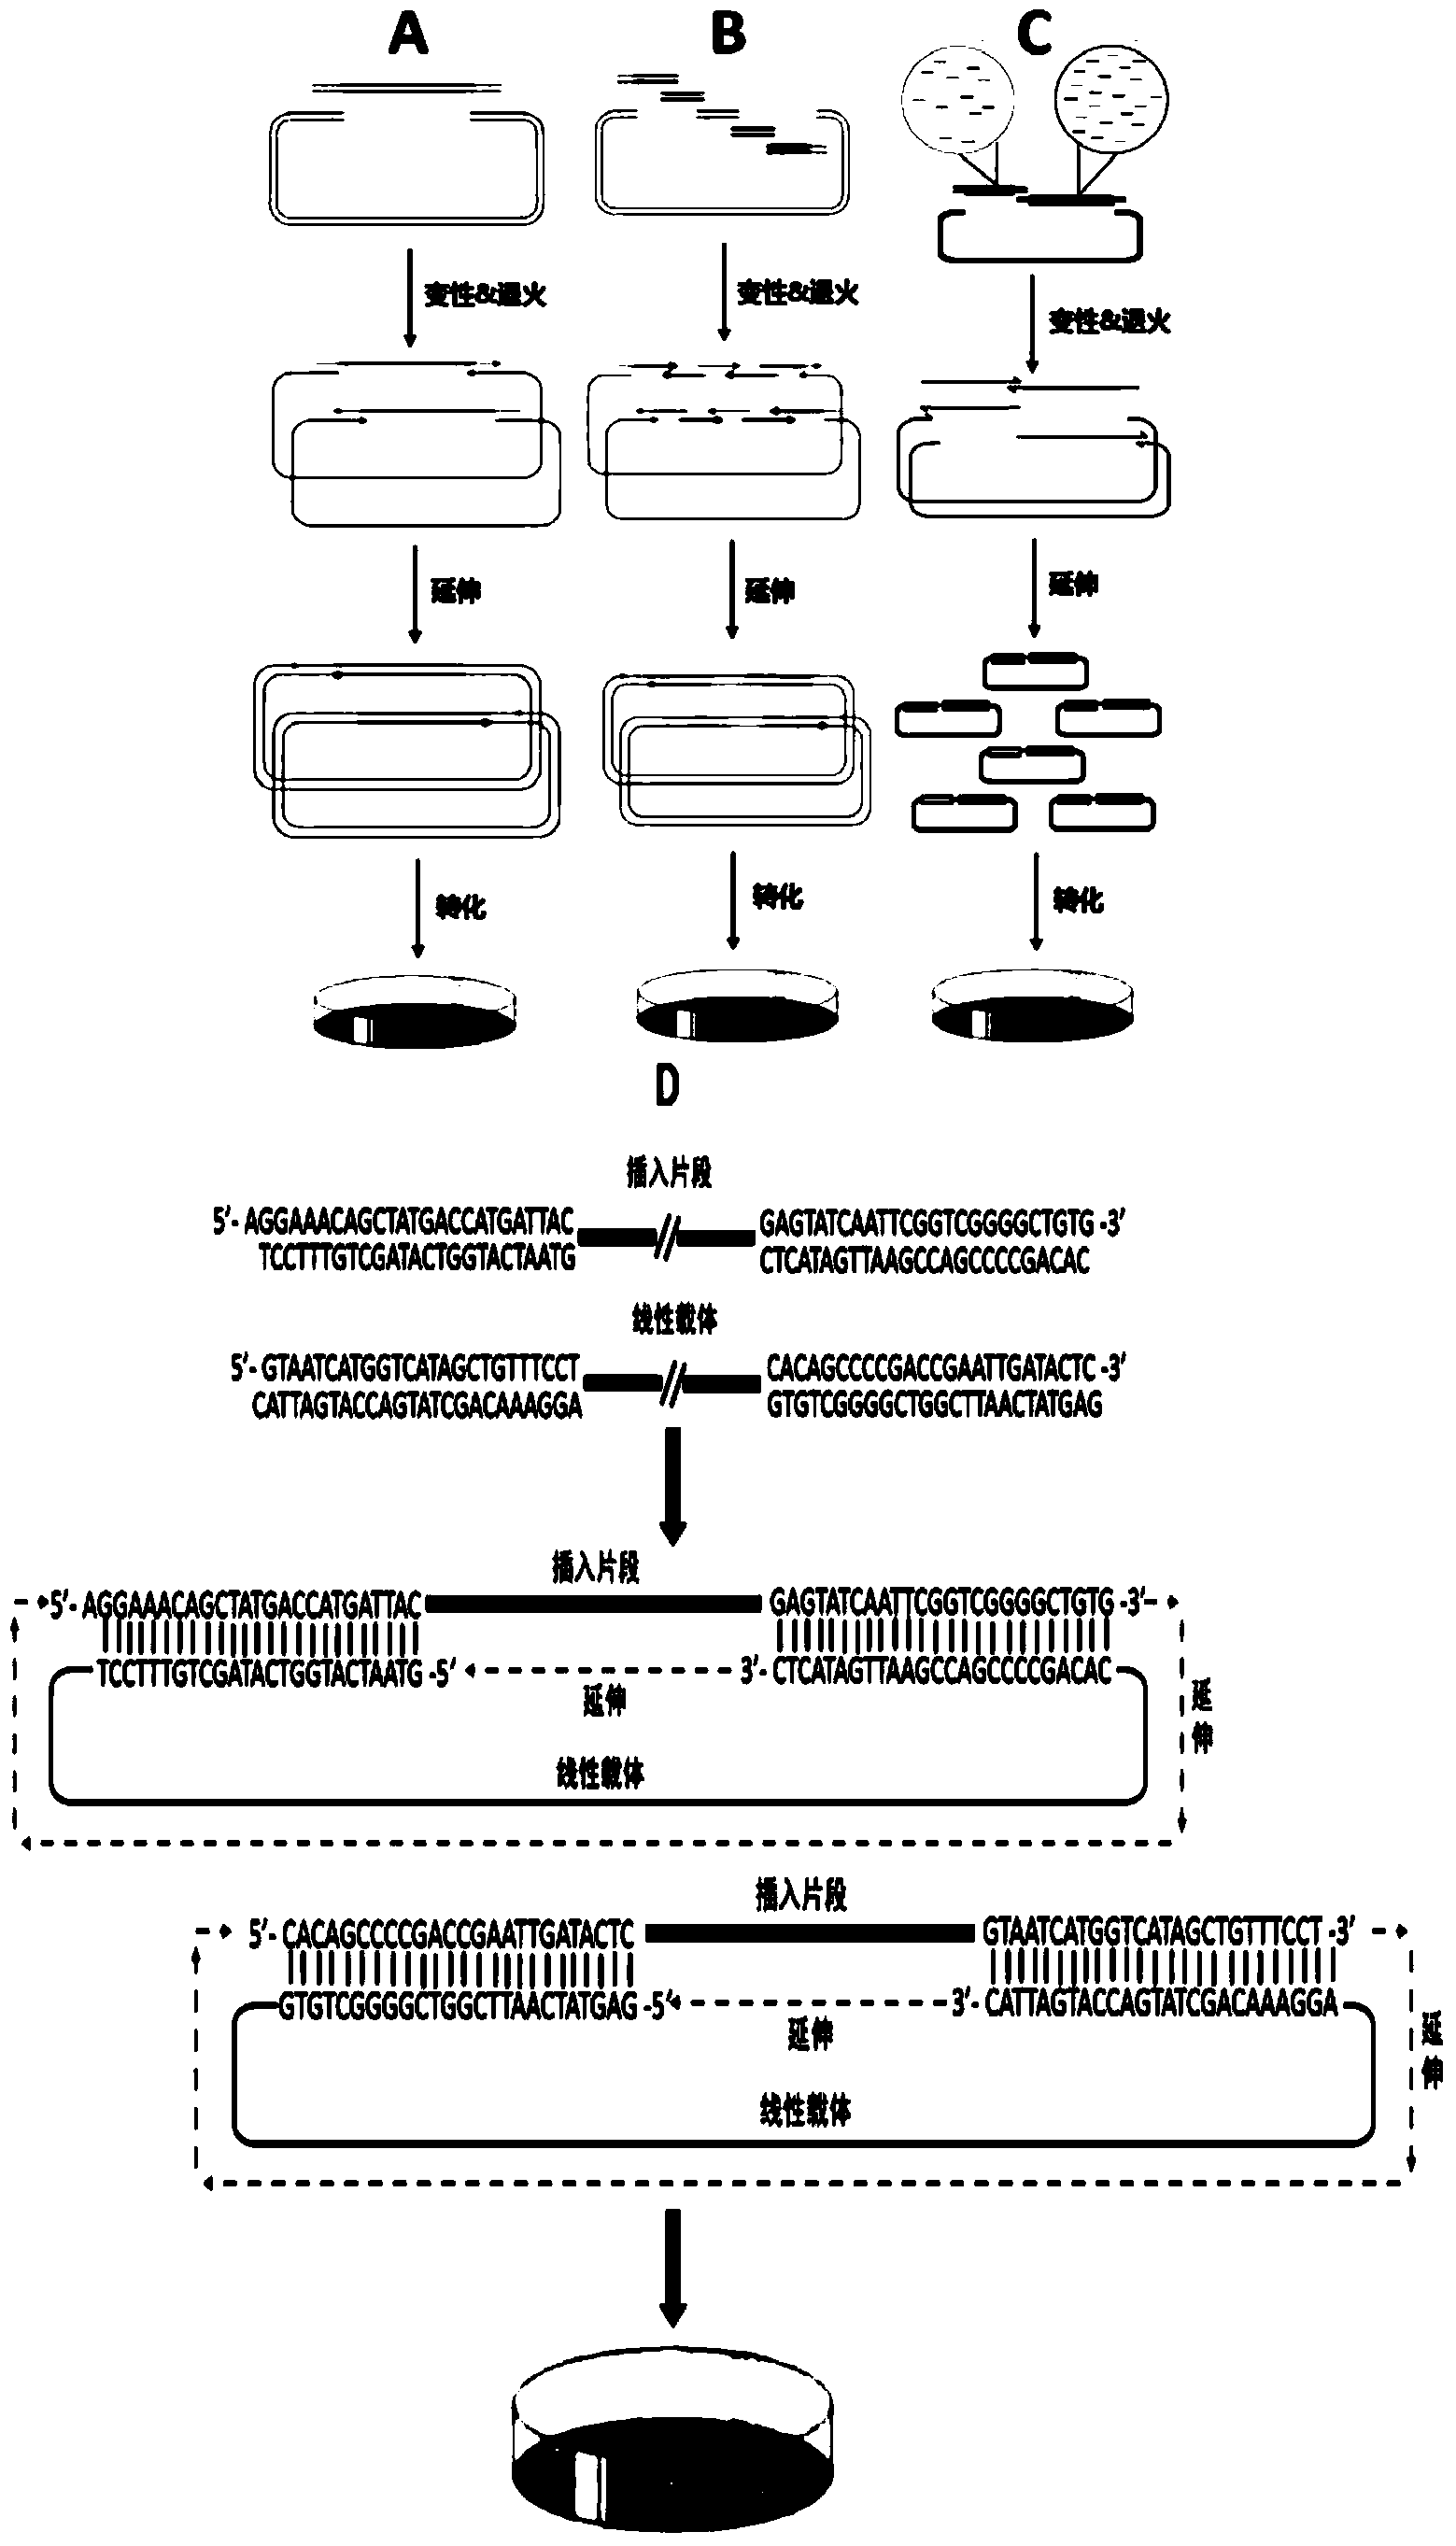 DNA assembly and cloning method